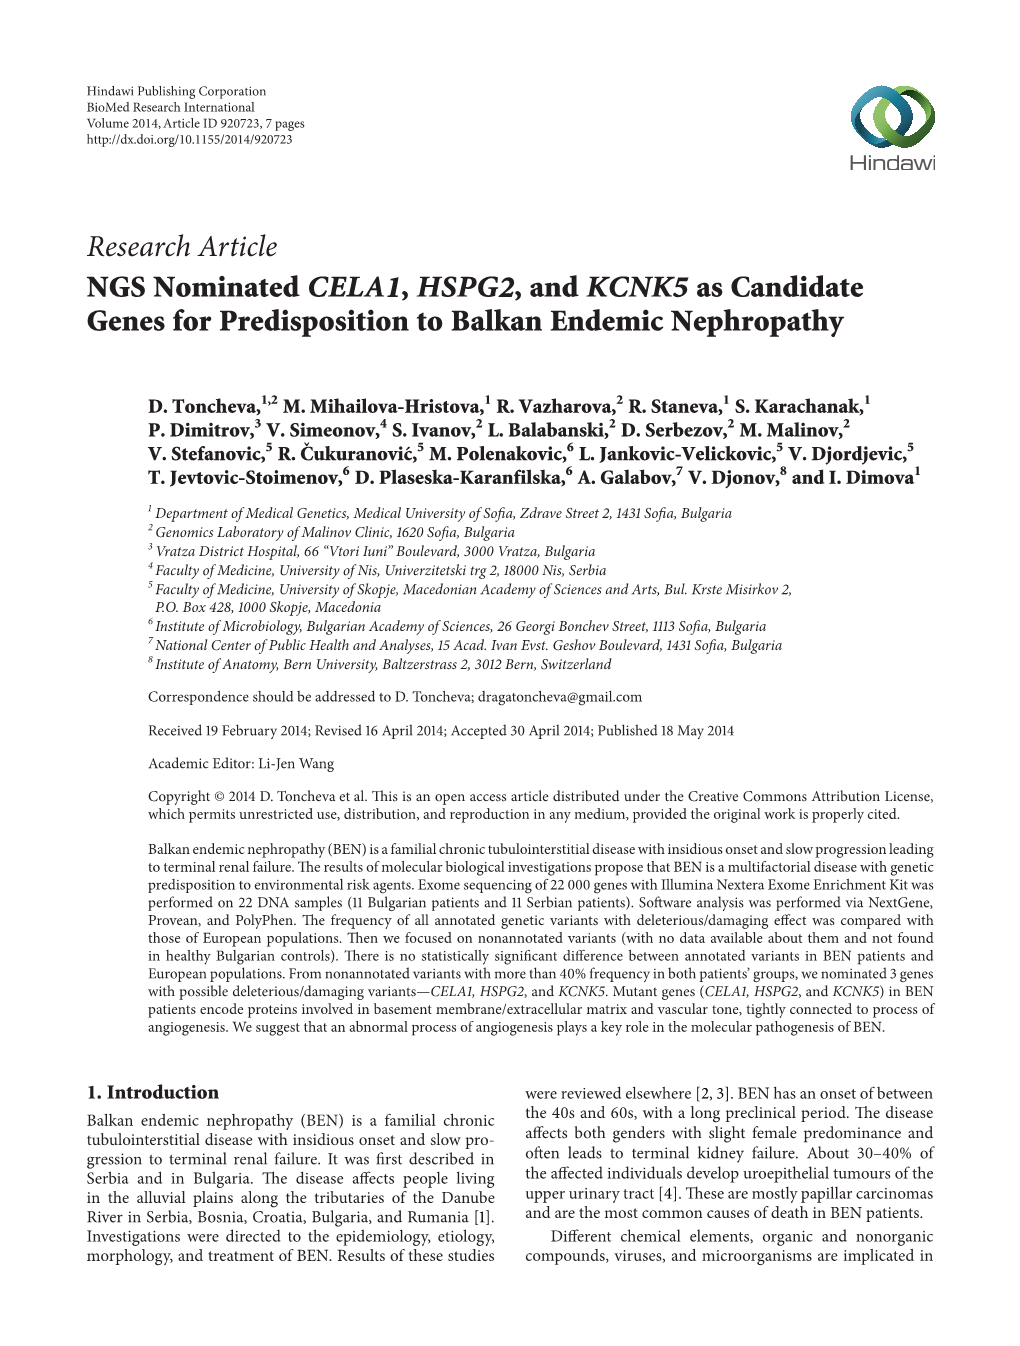 Research Article NGS Nominated CELA1, HSPG2, And